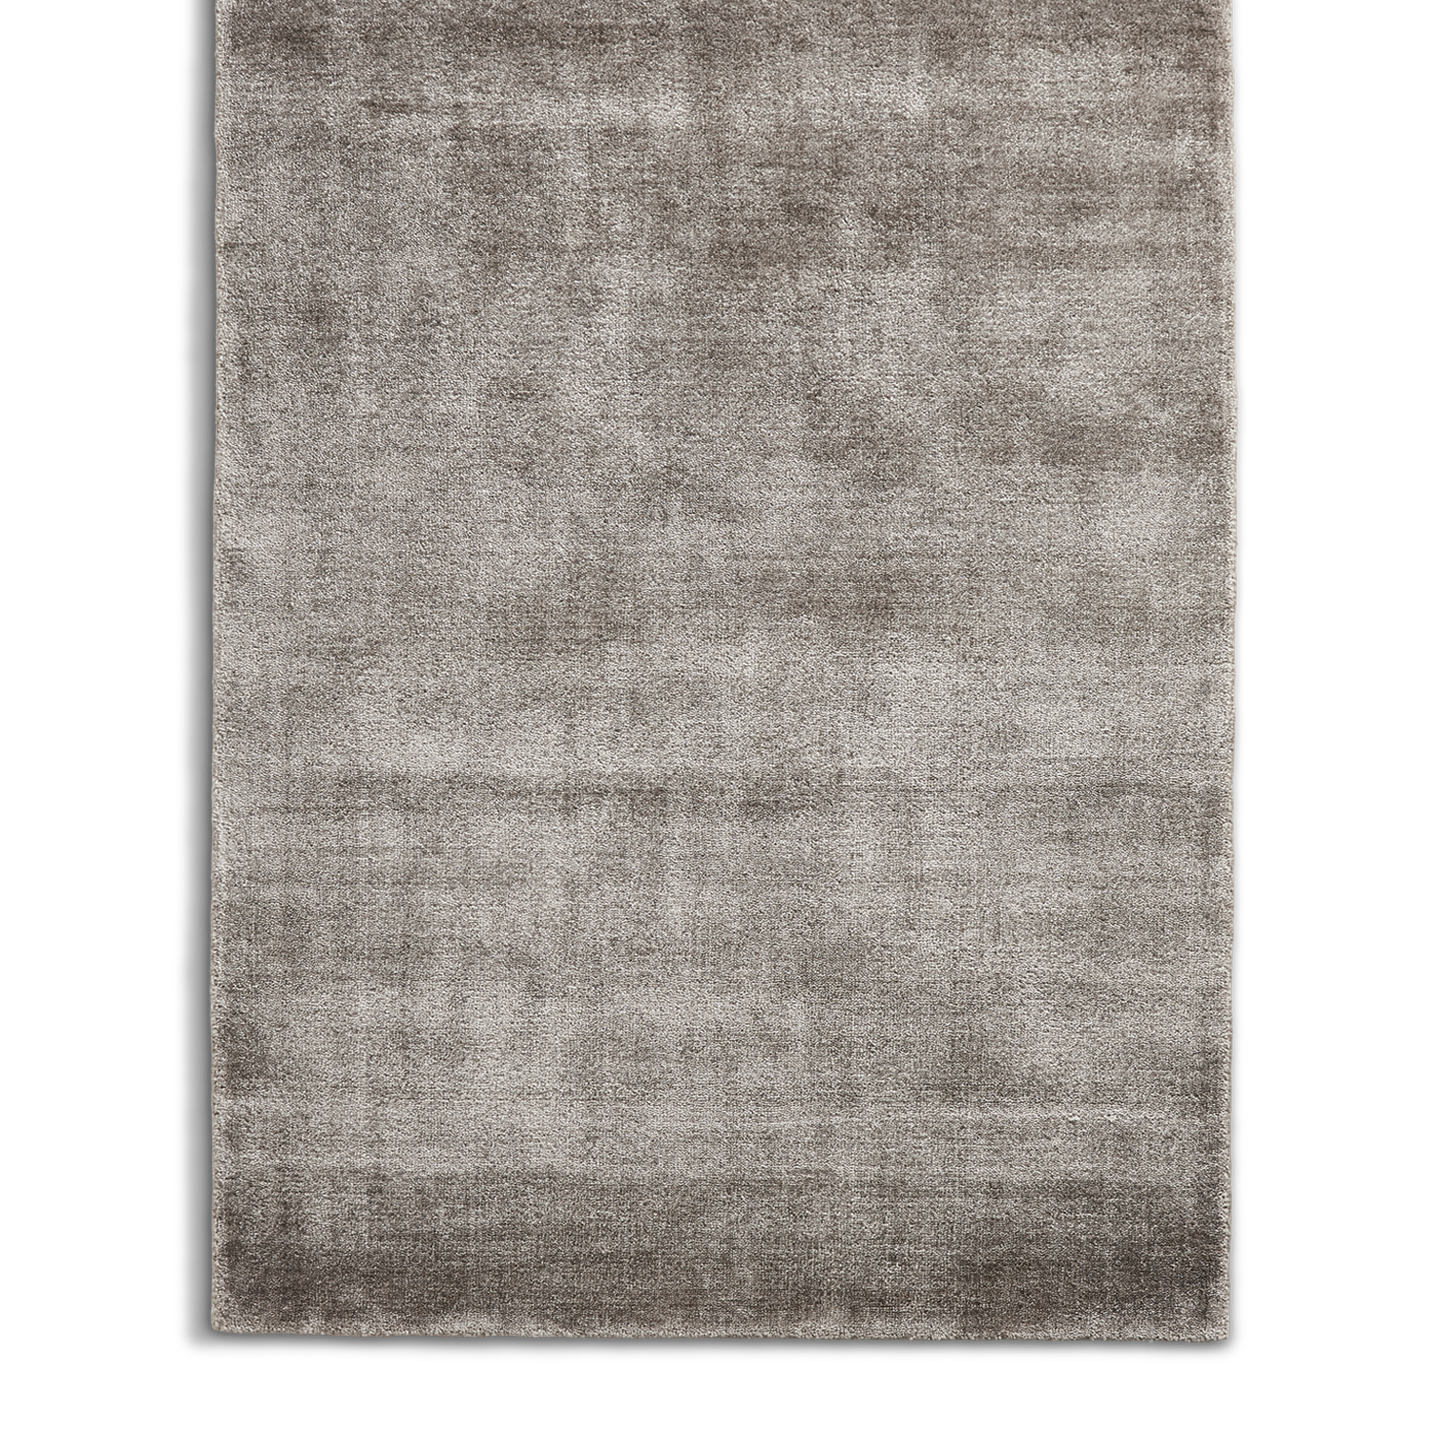 tint rug 200 x 300 cm by woud at adorn.house